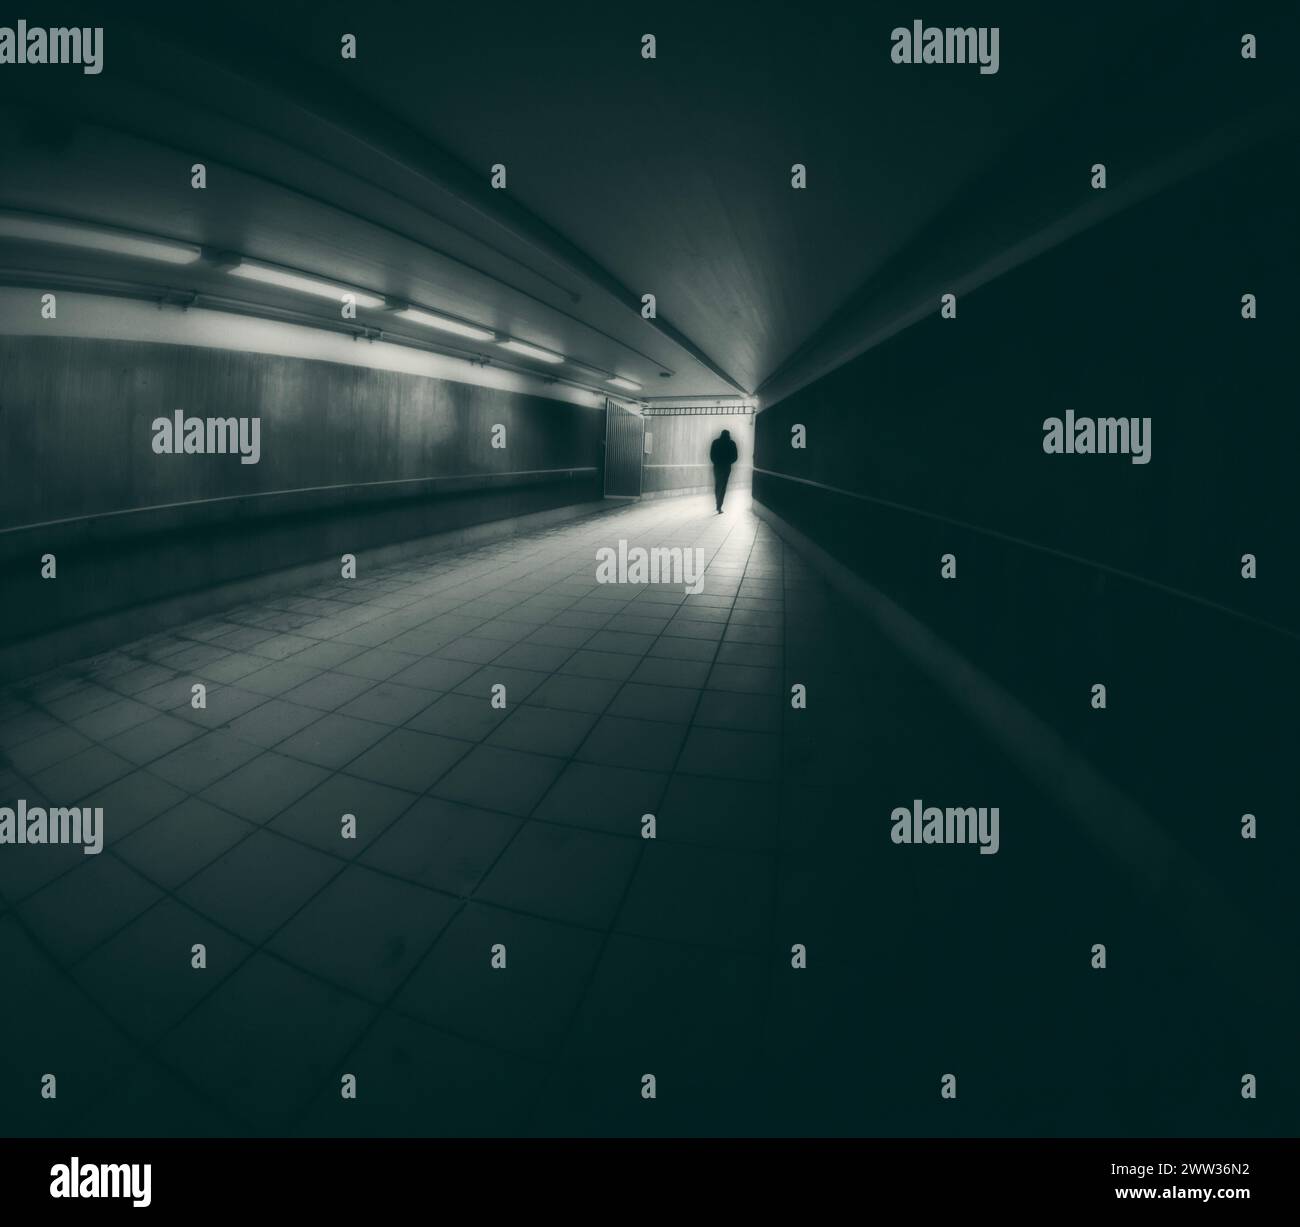 Creative dreamlike image of lonely young person walking toward the light in a tunnel. Stock Photo